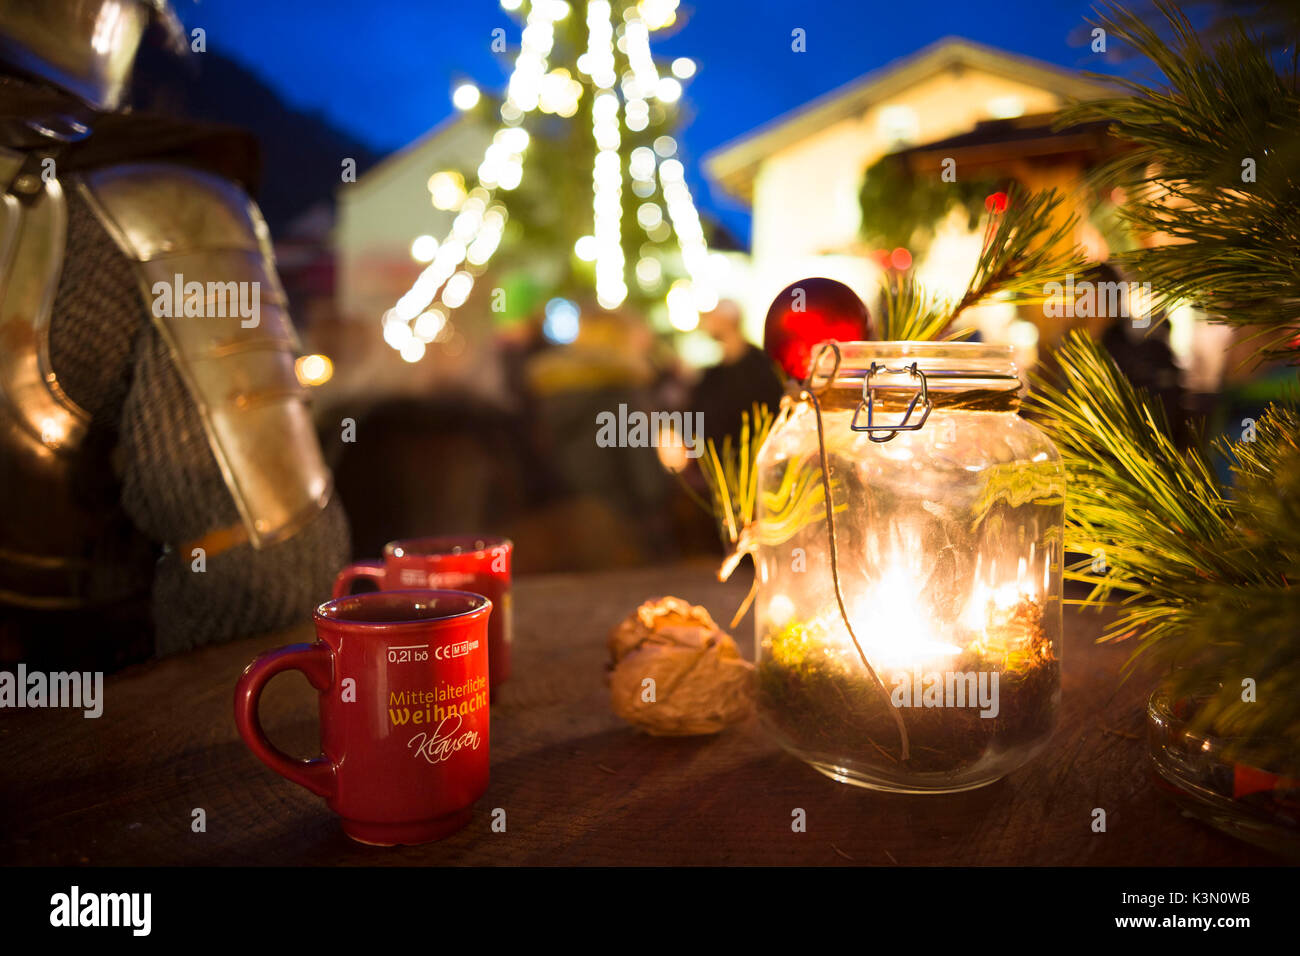 a close up image of a candle into a bottle during the Christmas medieval market in the village of Klausen, Bolzano province, South Tyrol, Trentino Alto Adige, Italy, Europe Stock Photo